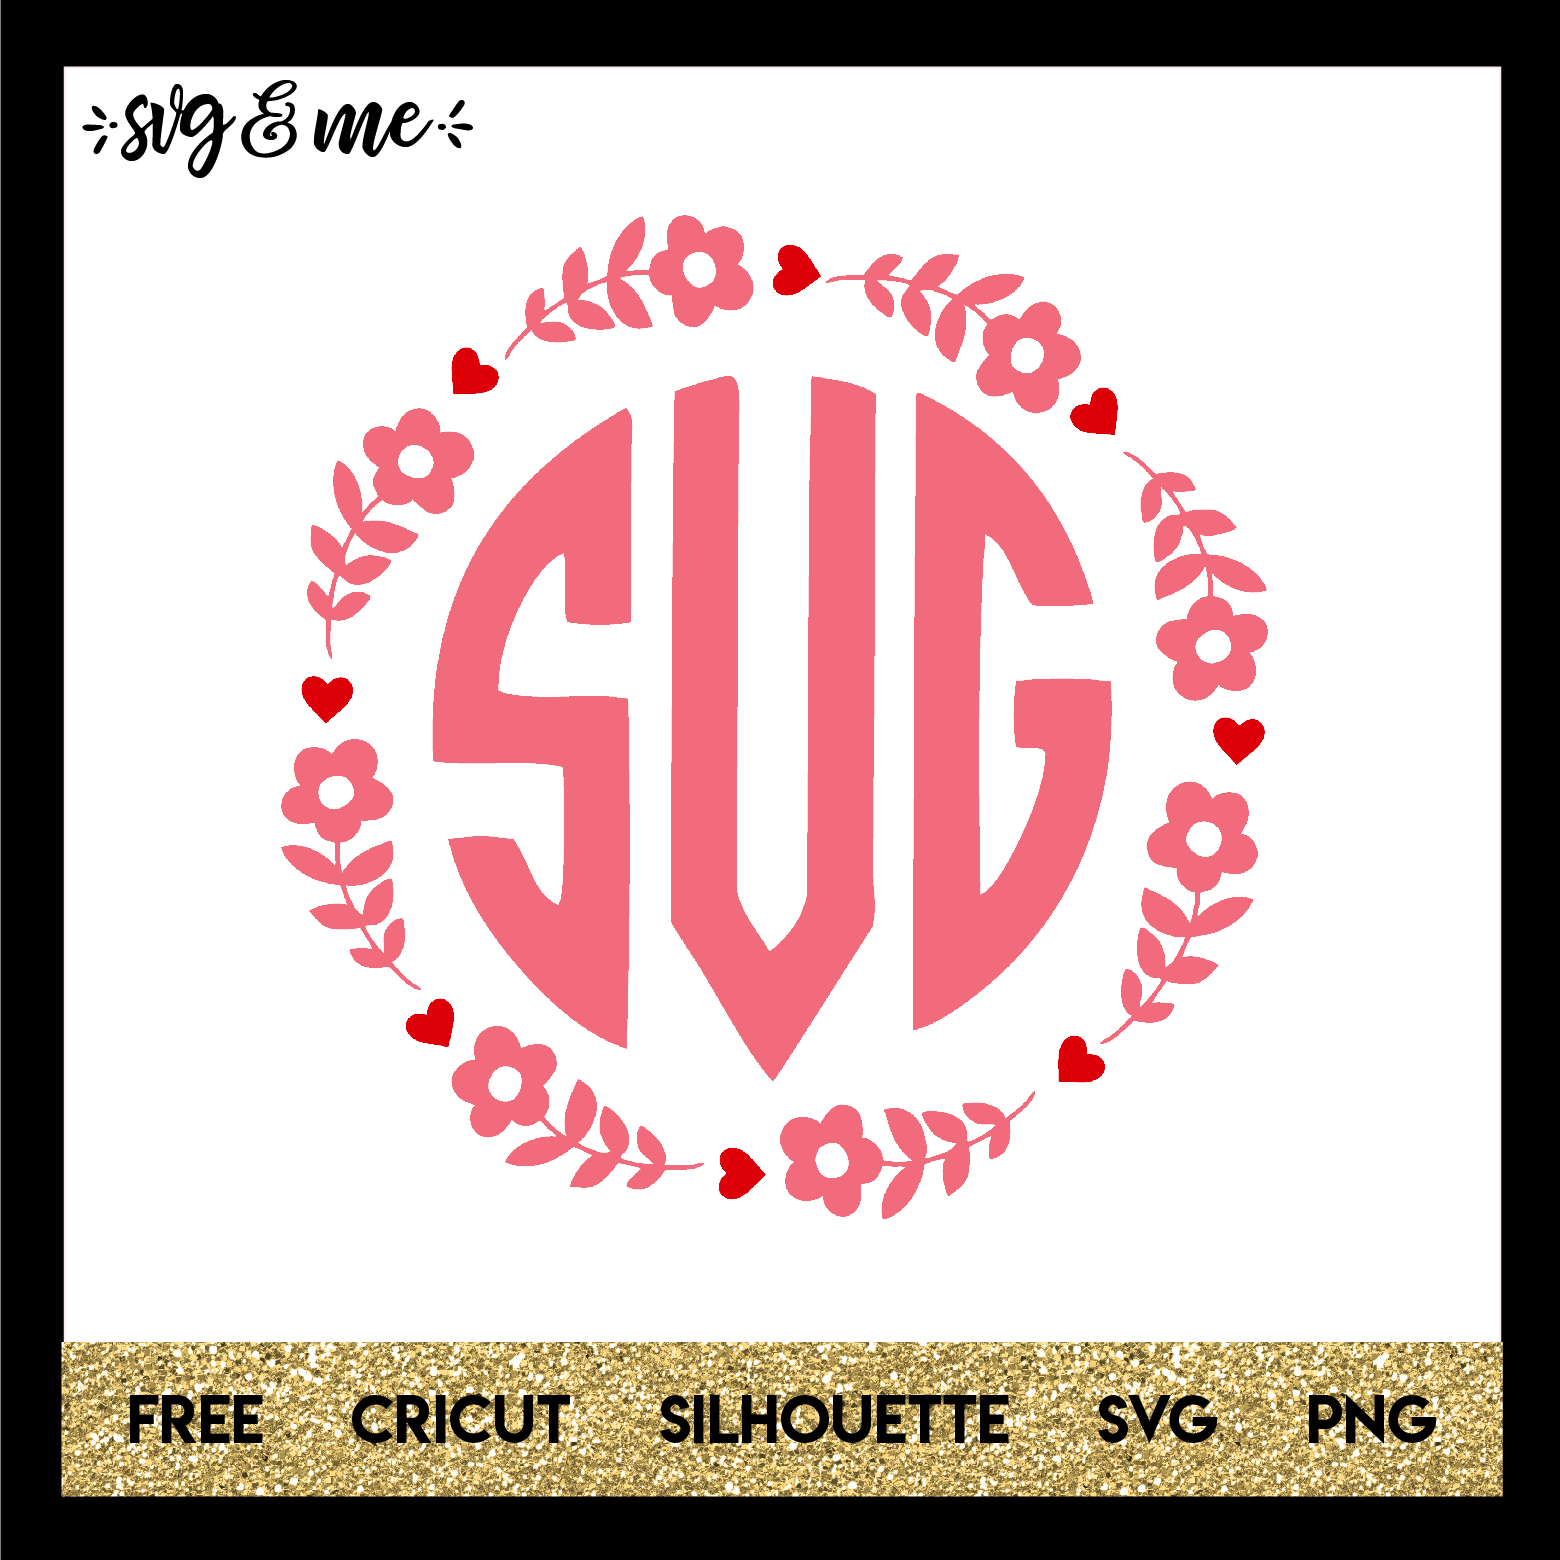 FREE SVG CUT FILE for Cricut, Silhouette and more - Flower Heart Wreath Monogram Frame SVG